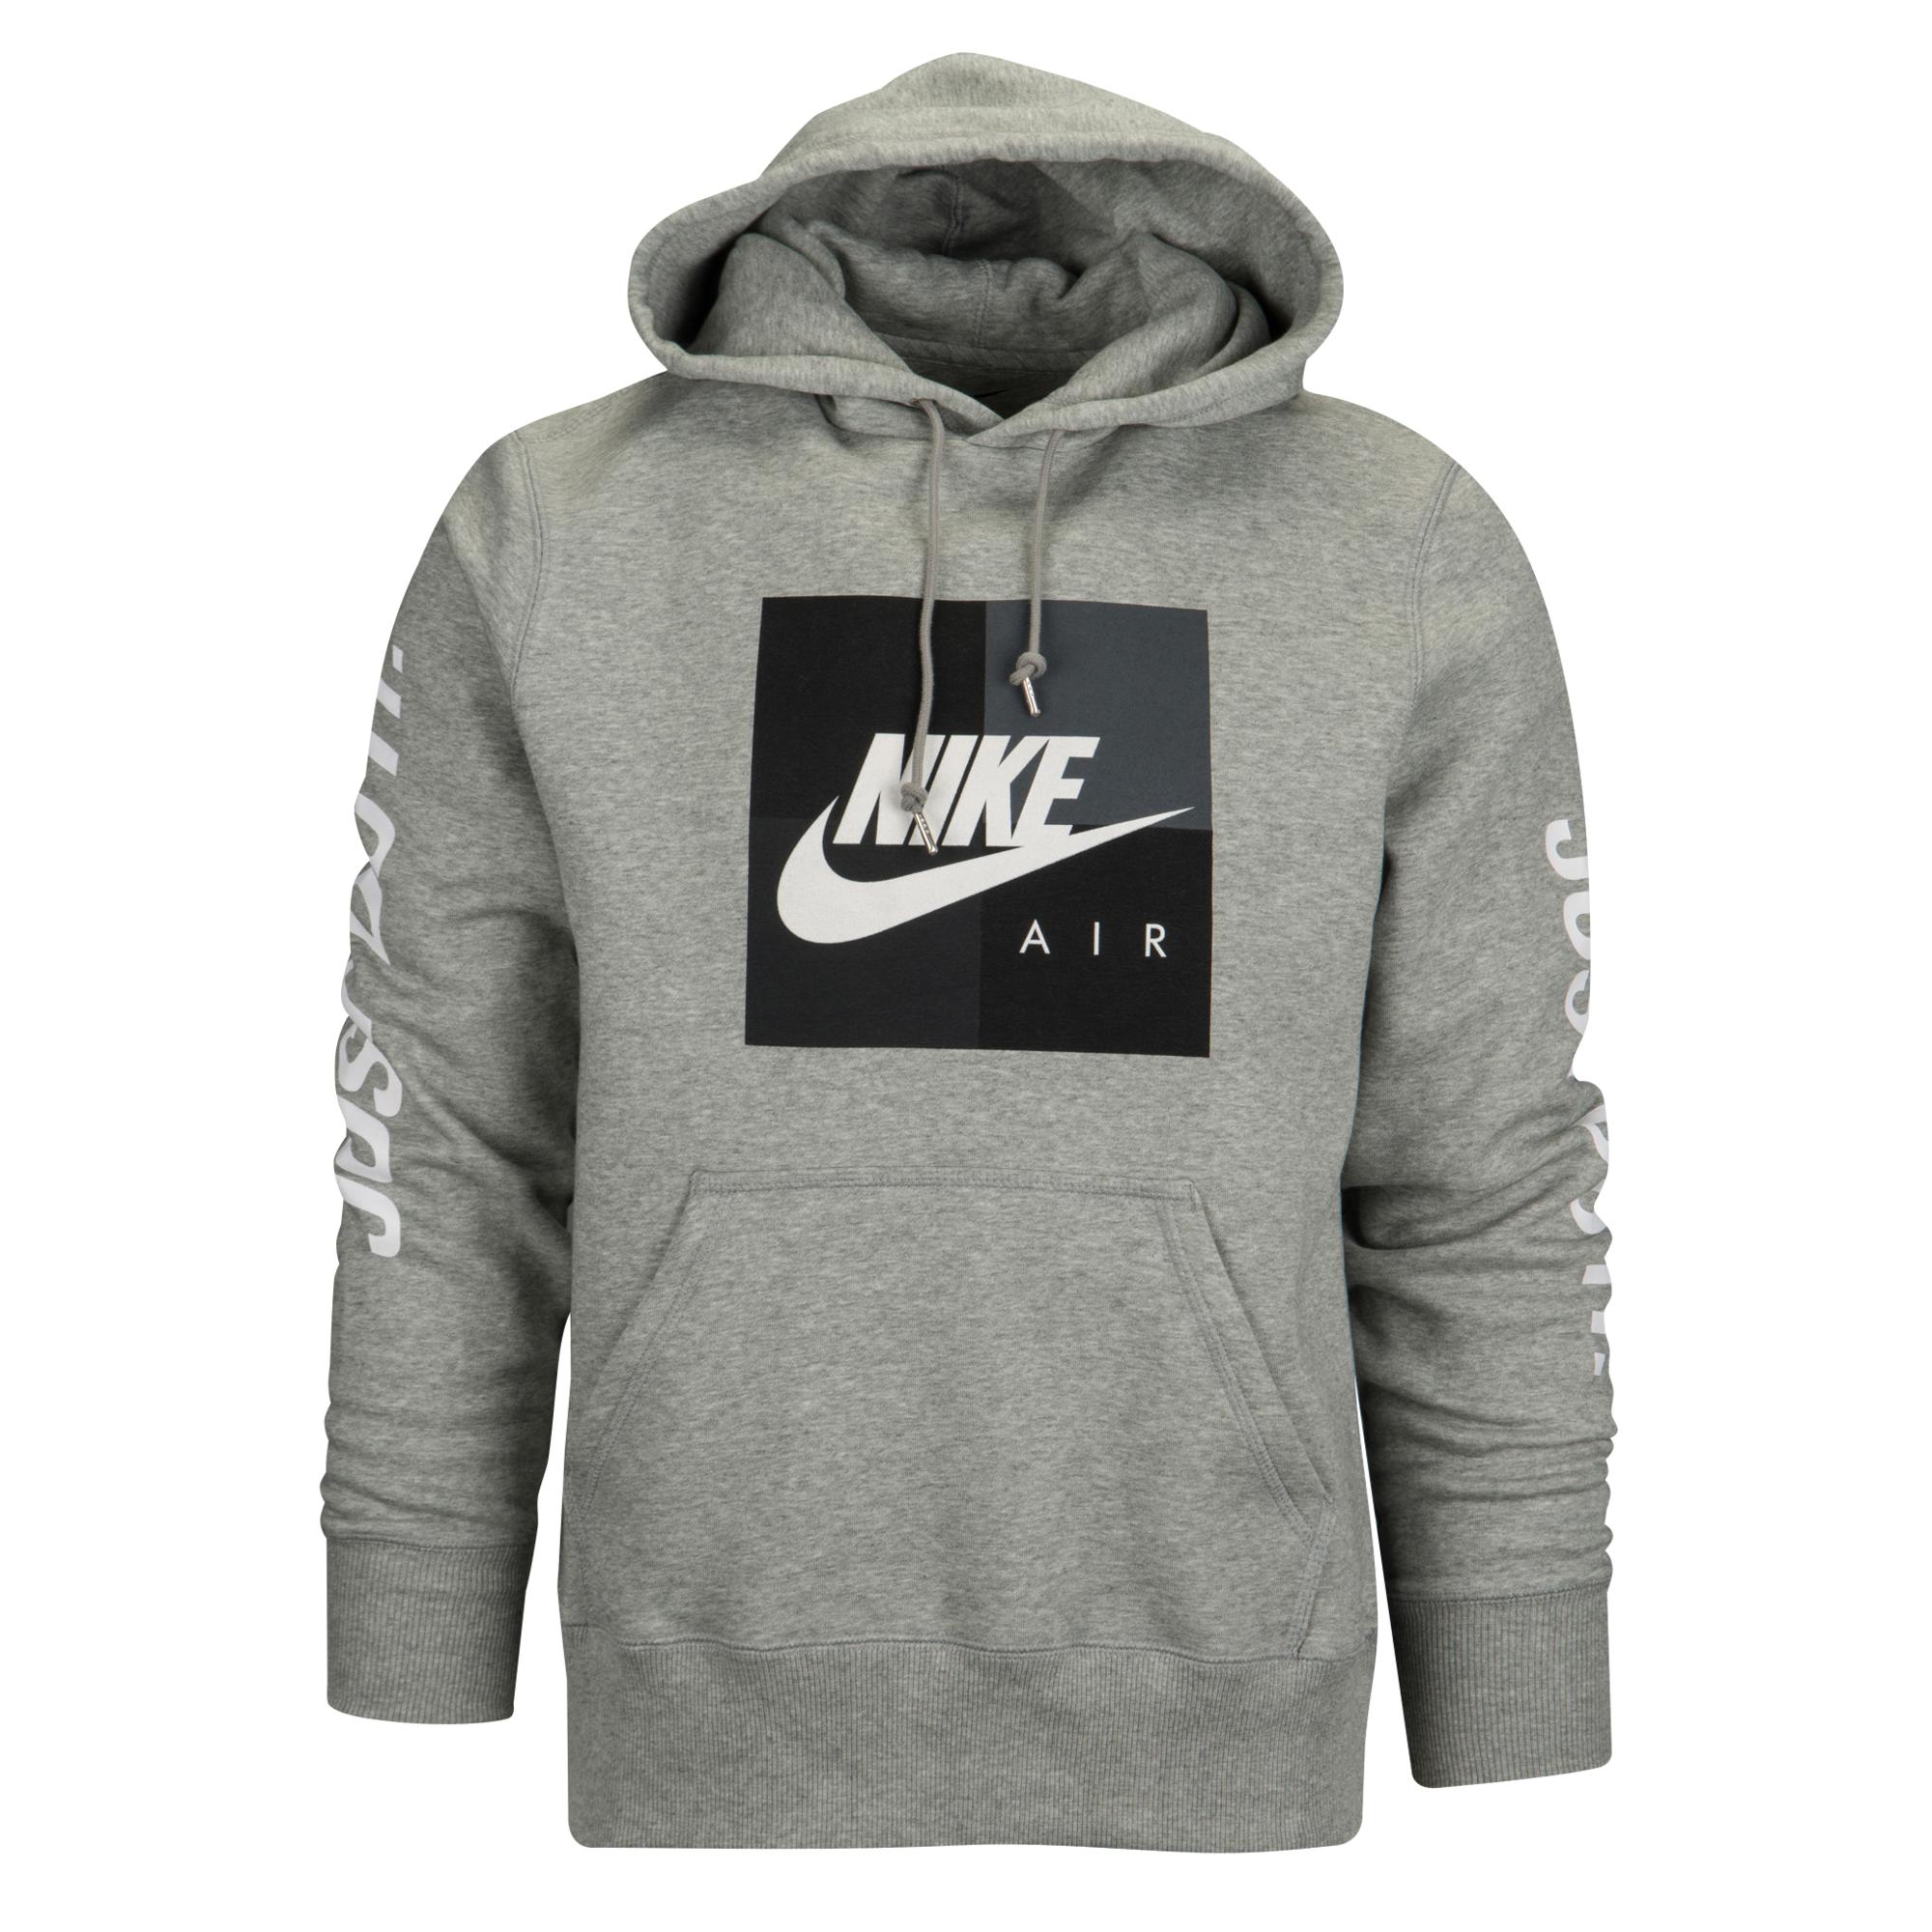 Nike Graphic Hoodie in Gray for Men - Lyst